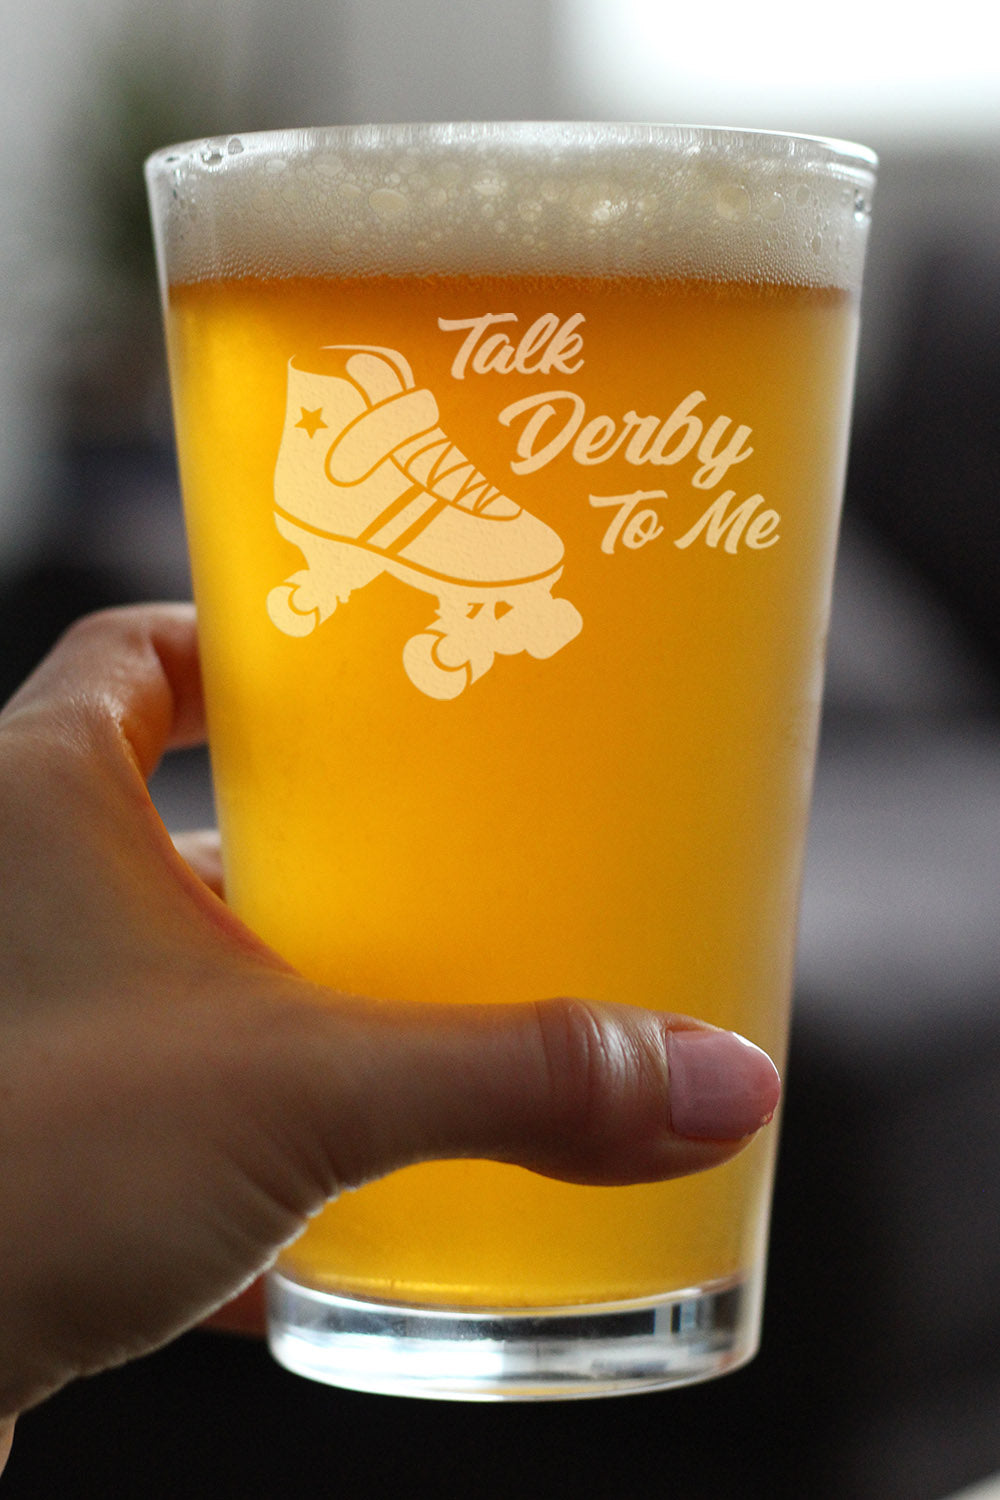 Talk Derby To Me - Pint Glass for Beer - Funny Rollerblading Gifts and Decor for Men &amp; Women - 16 Oz Glasses